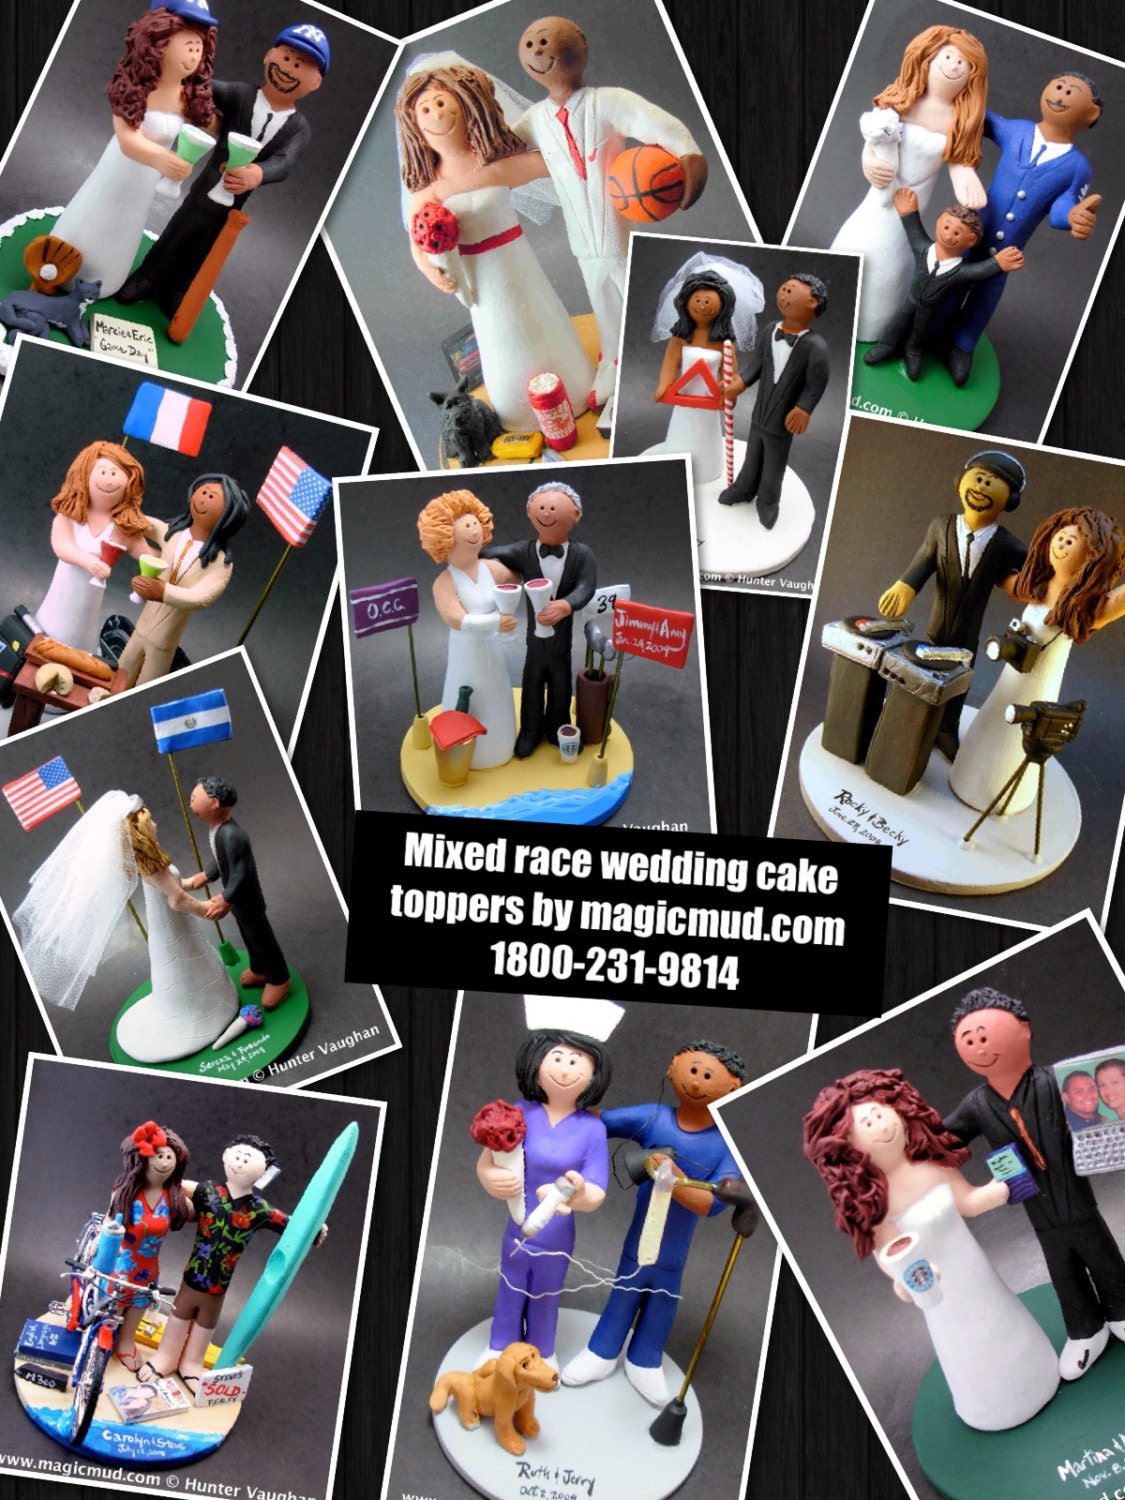 Interracial Wedding Cake Toppers Mixed Race Wedding Caketopper Birac Customweddingcaketoppers 